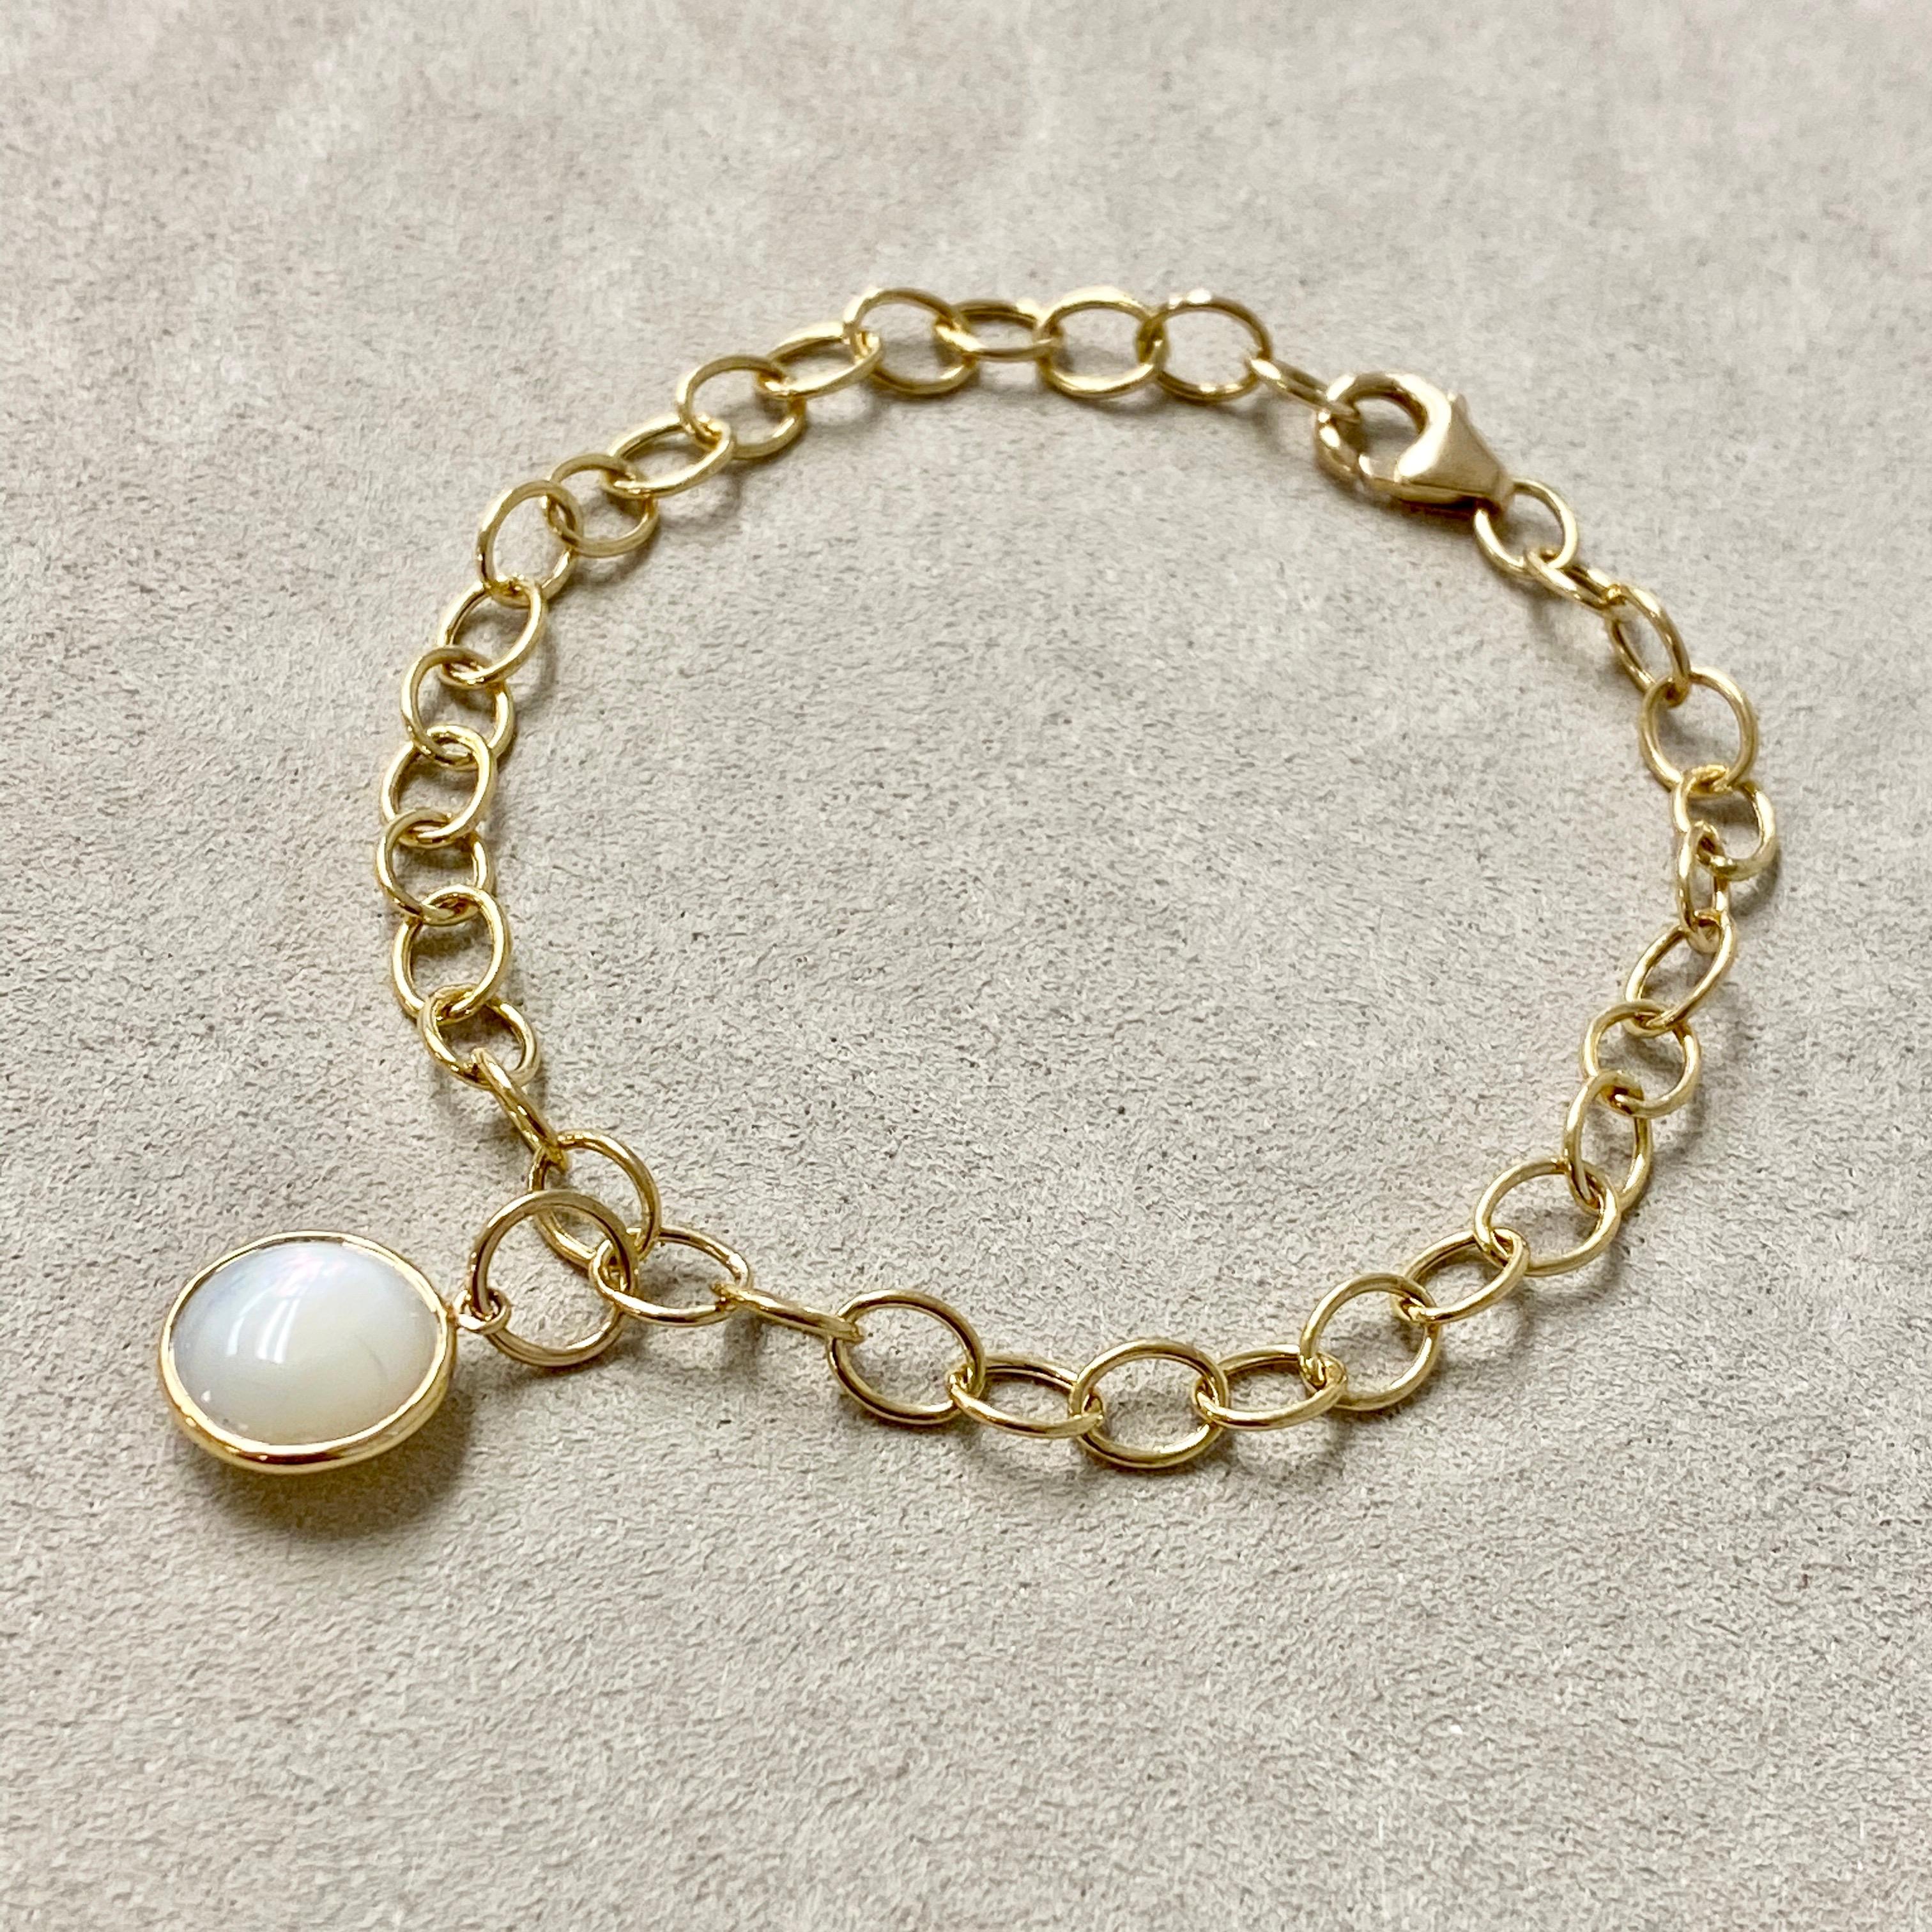 Created in 18 karat yellow gold
Mother of Pearl 3.5 cts approx 
7 inches length with lobster clasp

Exquisitely crafted from 18 karat yellow gold and adorned with 3.5 carats of luminous Mother of Pearl, this 7-inch-long Bracelets is fastened with a